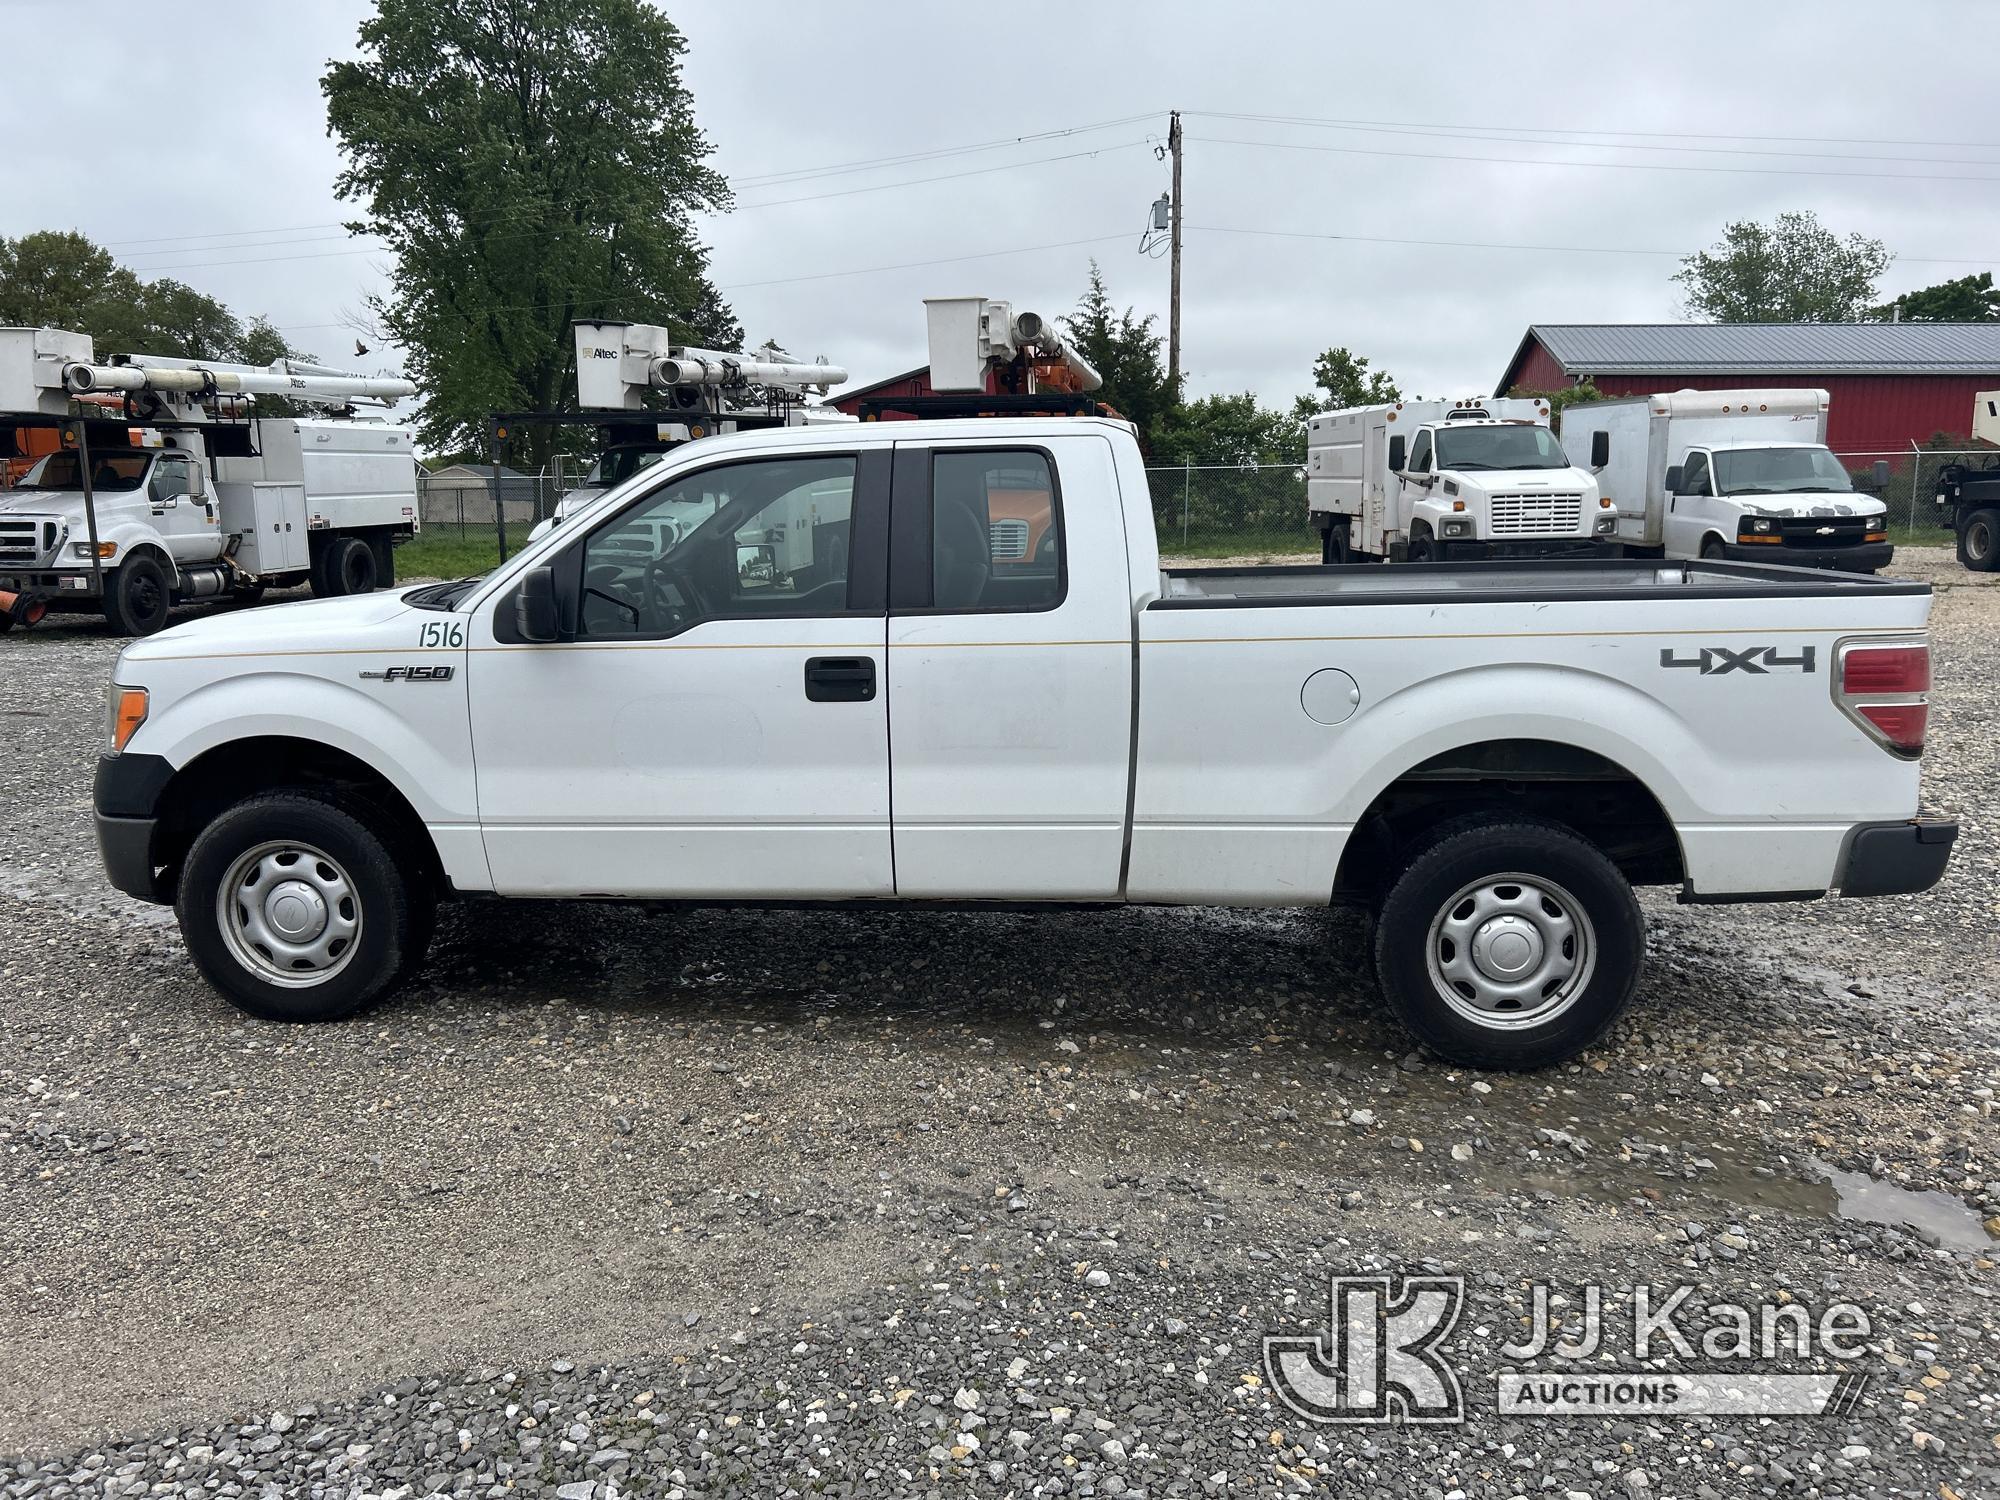 (Hawk Point, MO) 2011 Ford F150 4x4 Extended-Cab Pickup Truck Runs & Moves) (Check Engine Light On)